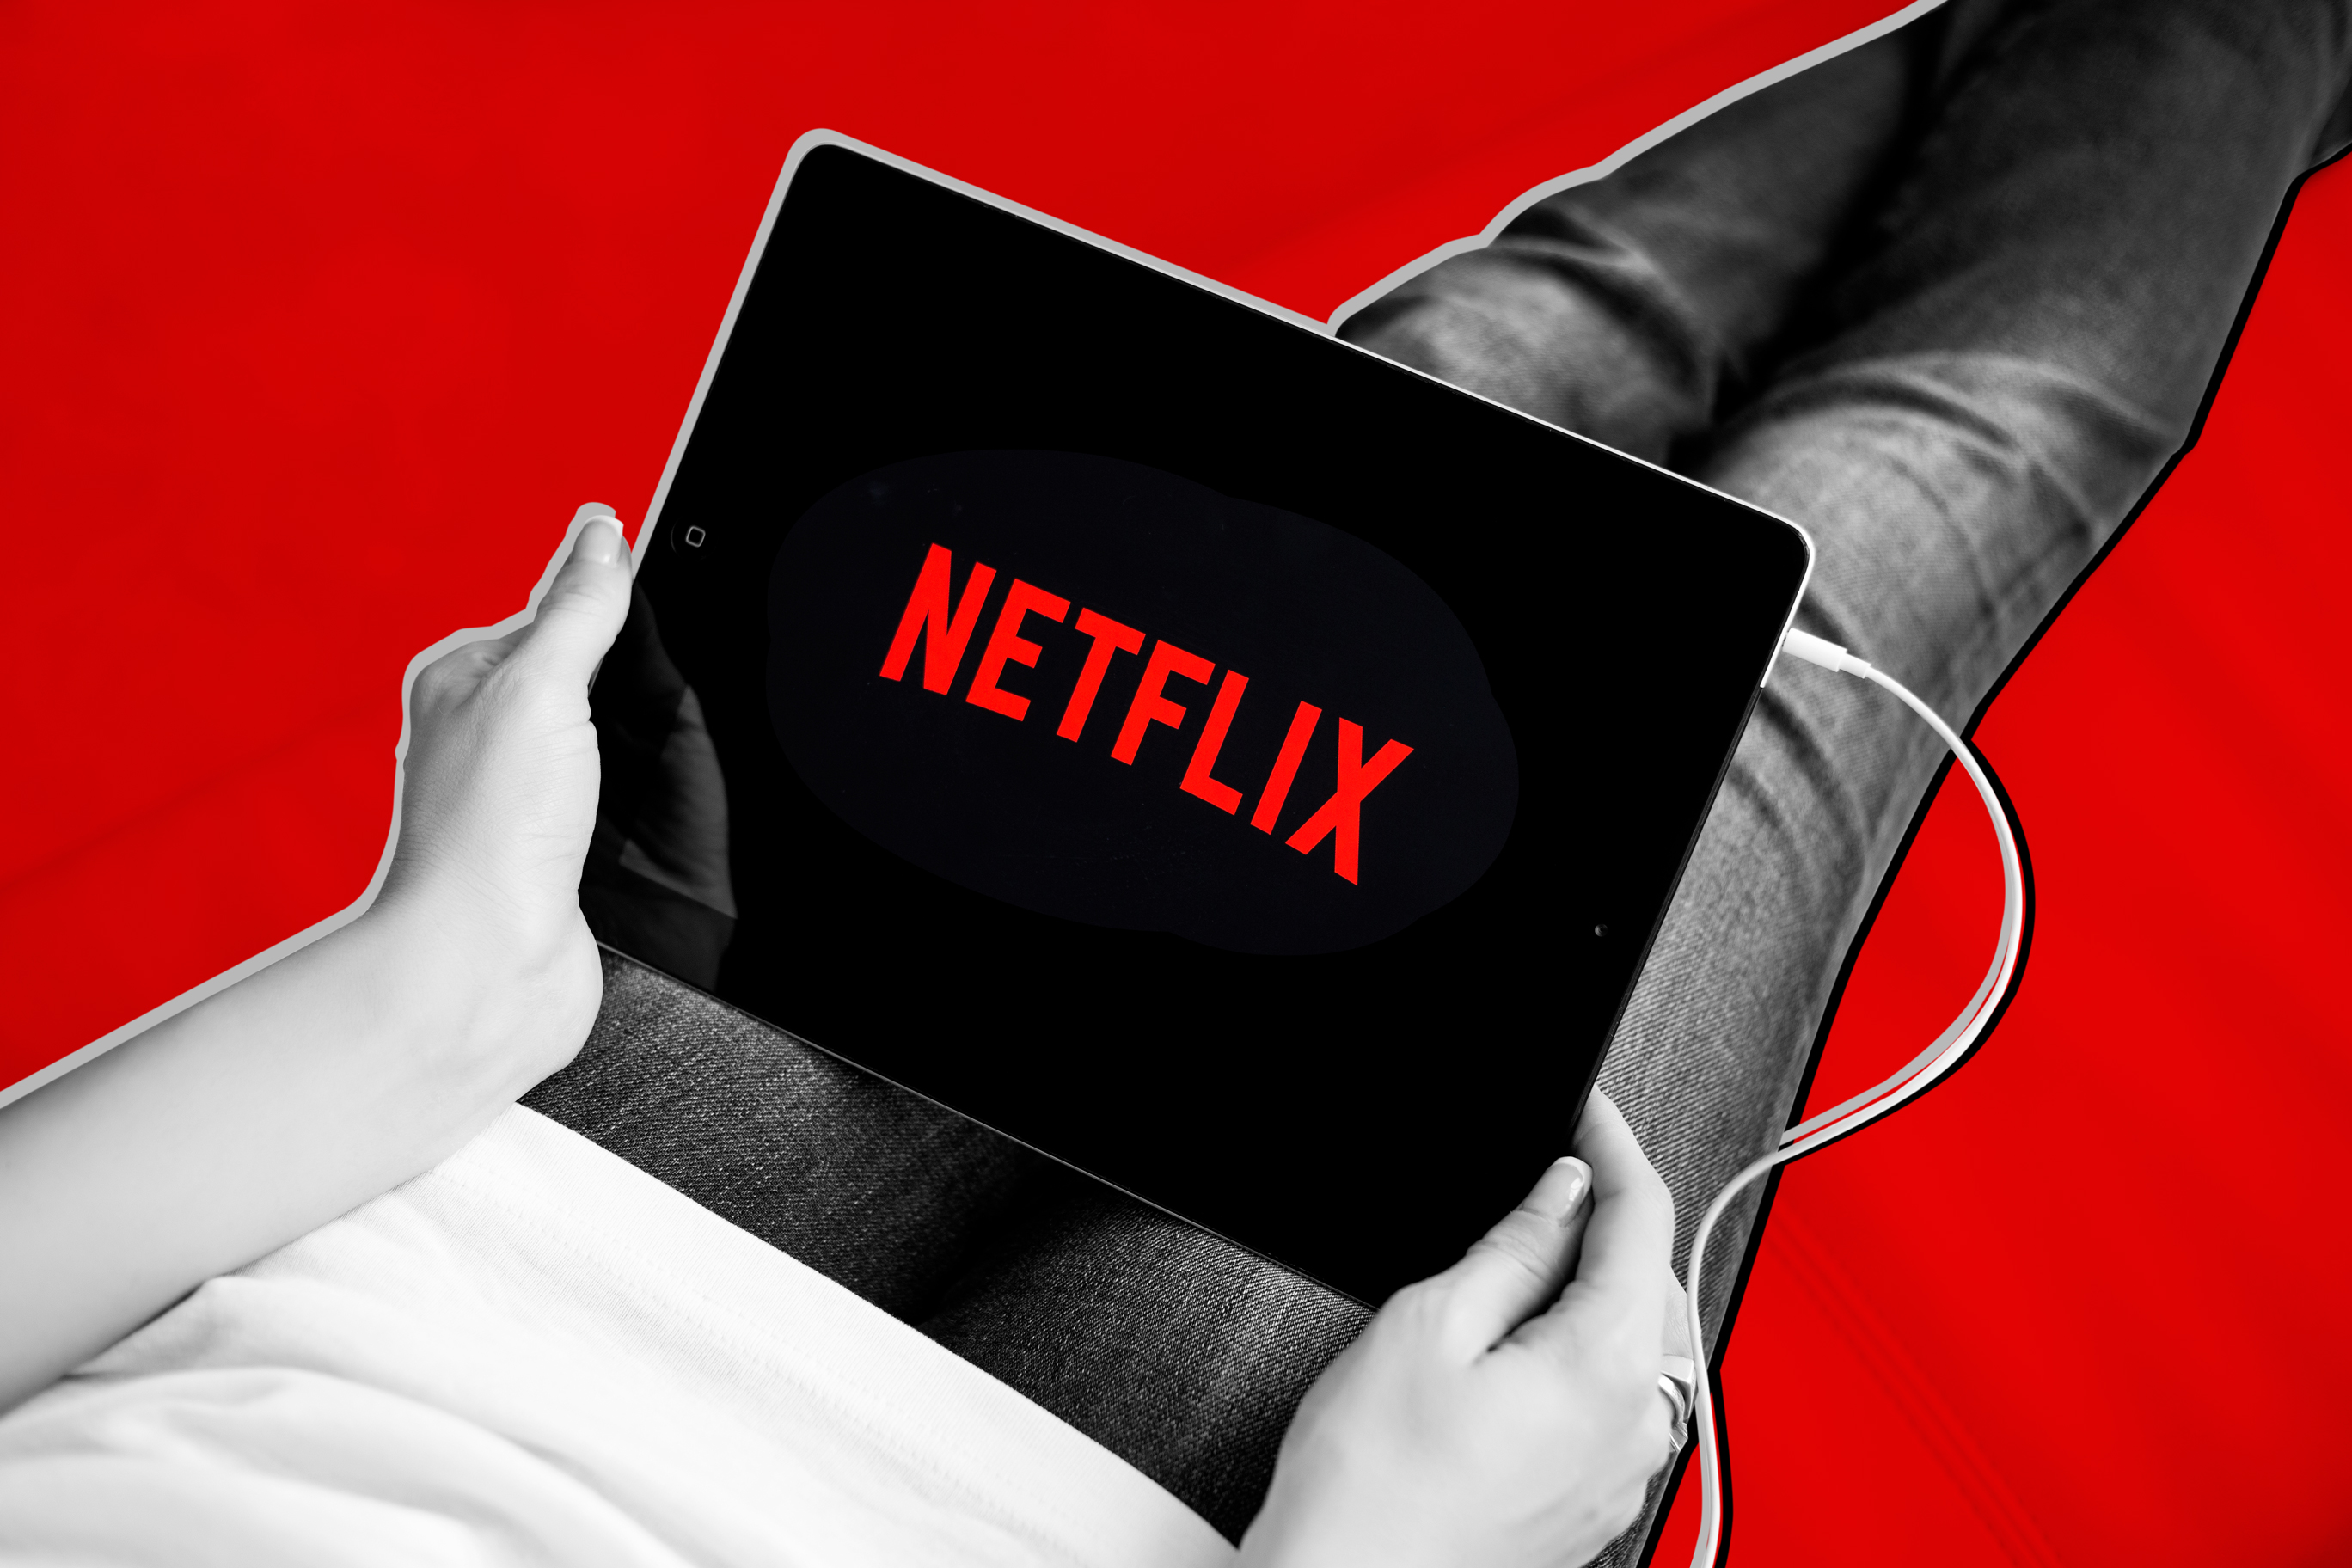 Netflix will charge an extra $8 monthly to subscribers who share